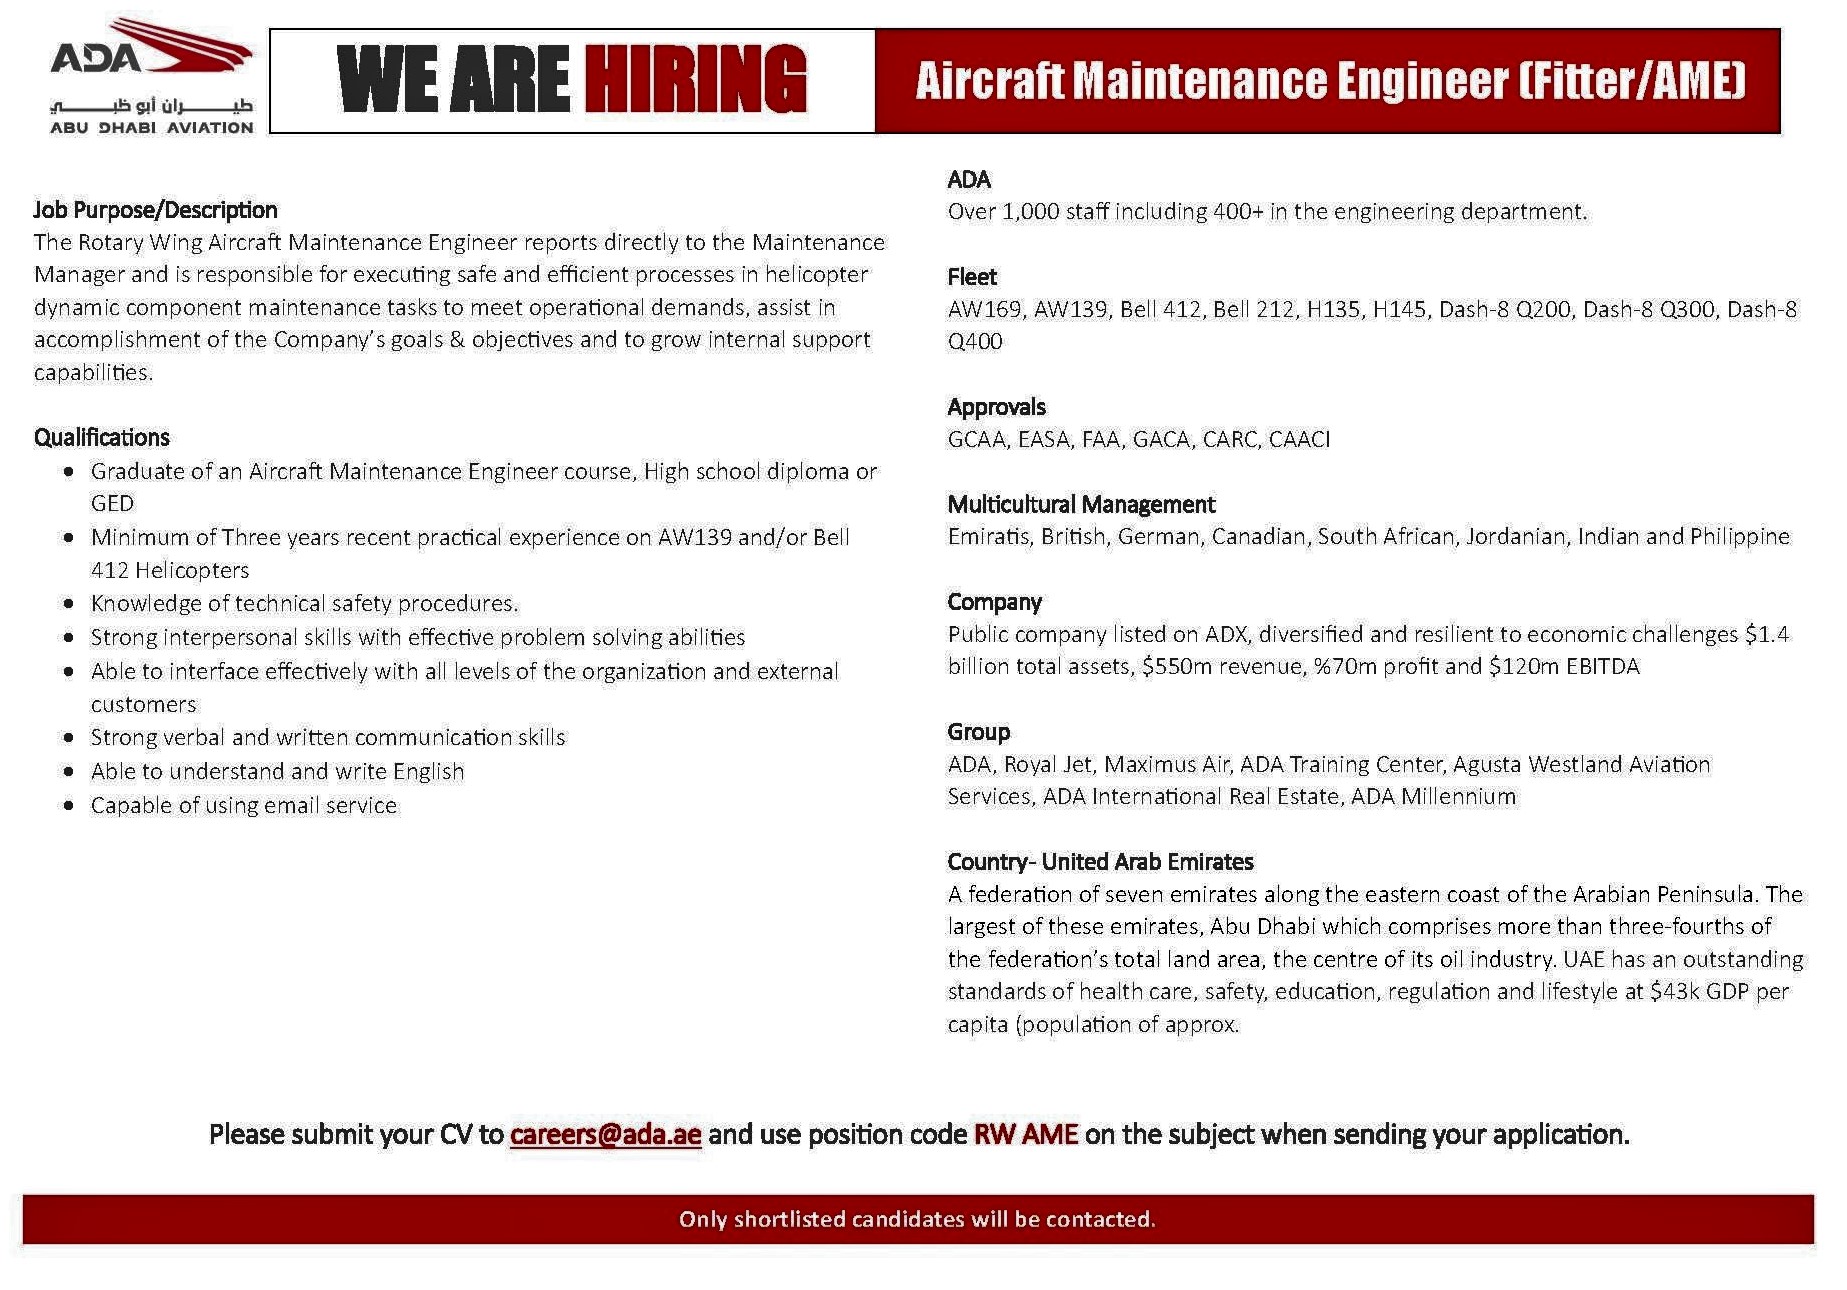 Job Opening Alert ! Abu Dhabi Aviation , UAE is recruiting for Rotary wing - Aircraft Maintenance Engineers for their Facility !